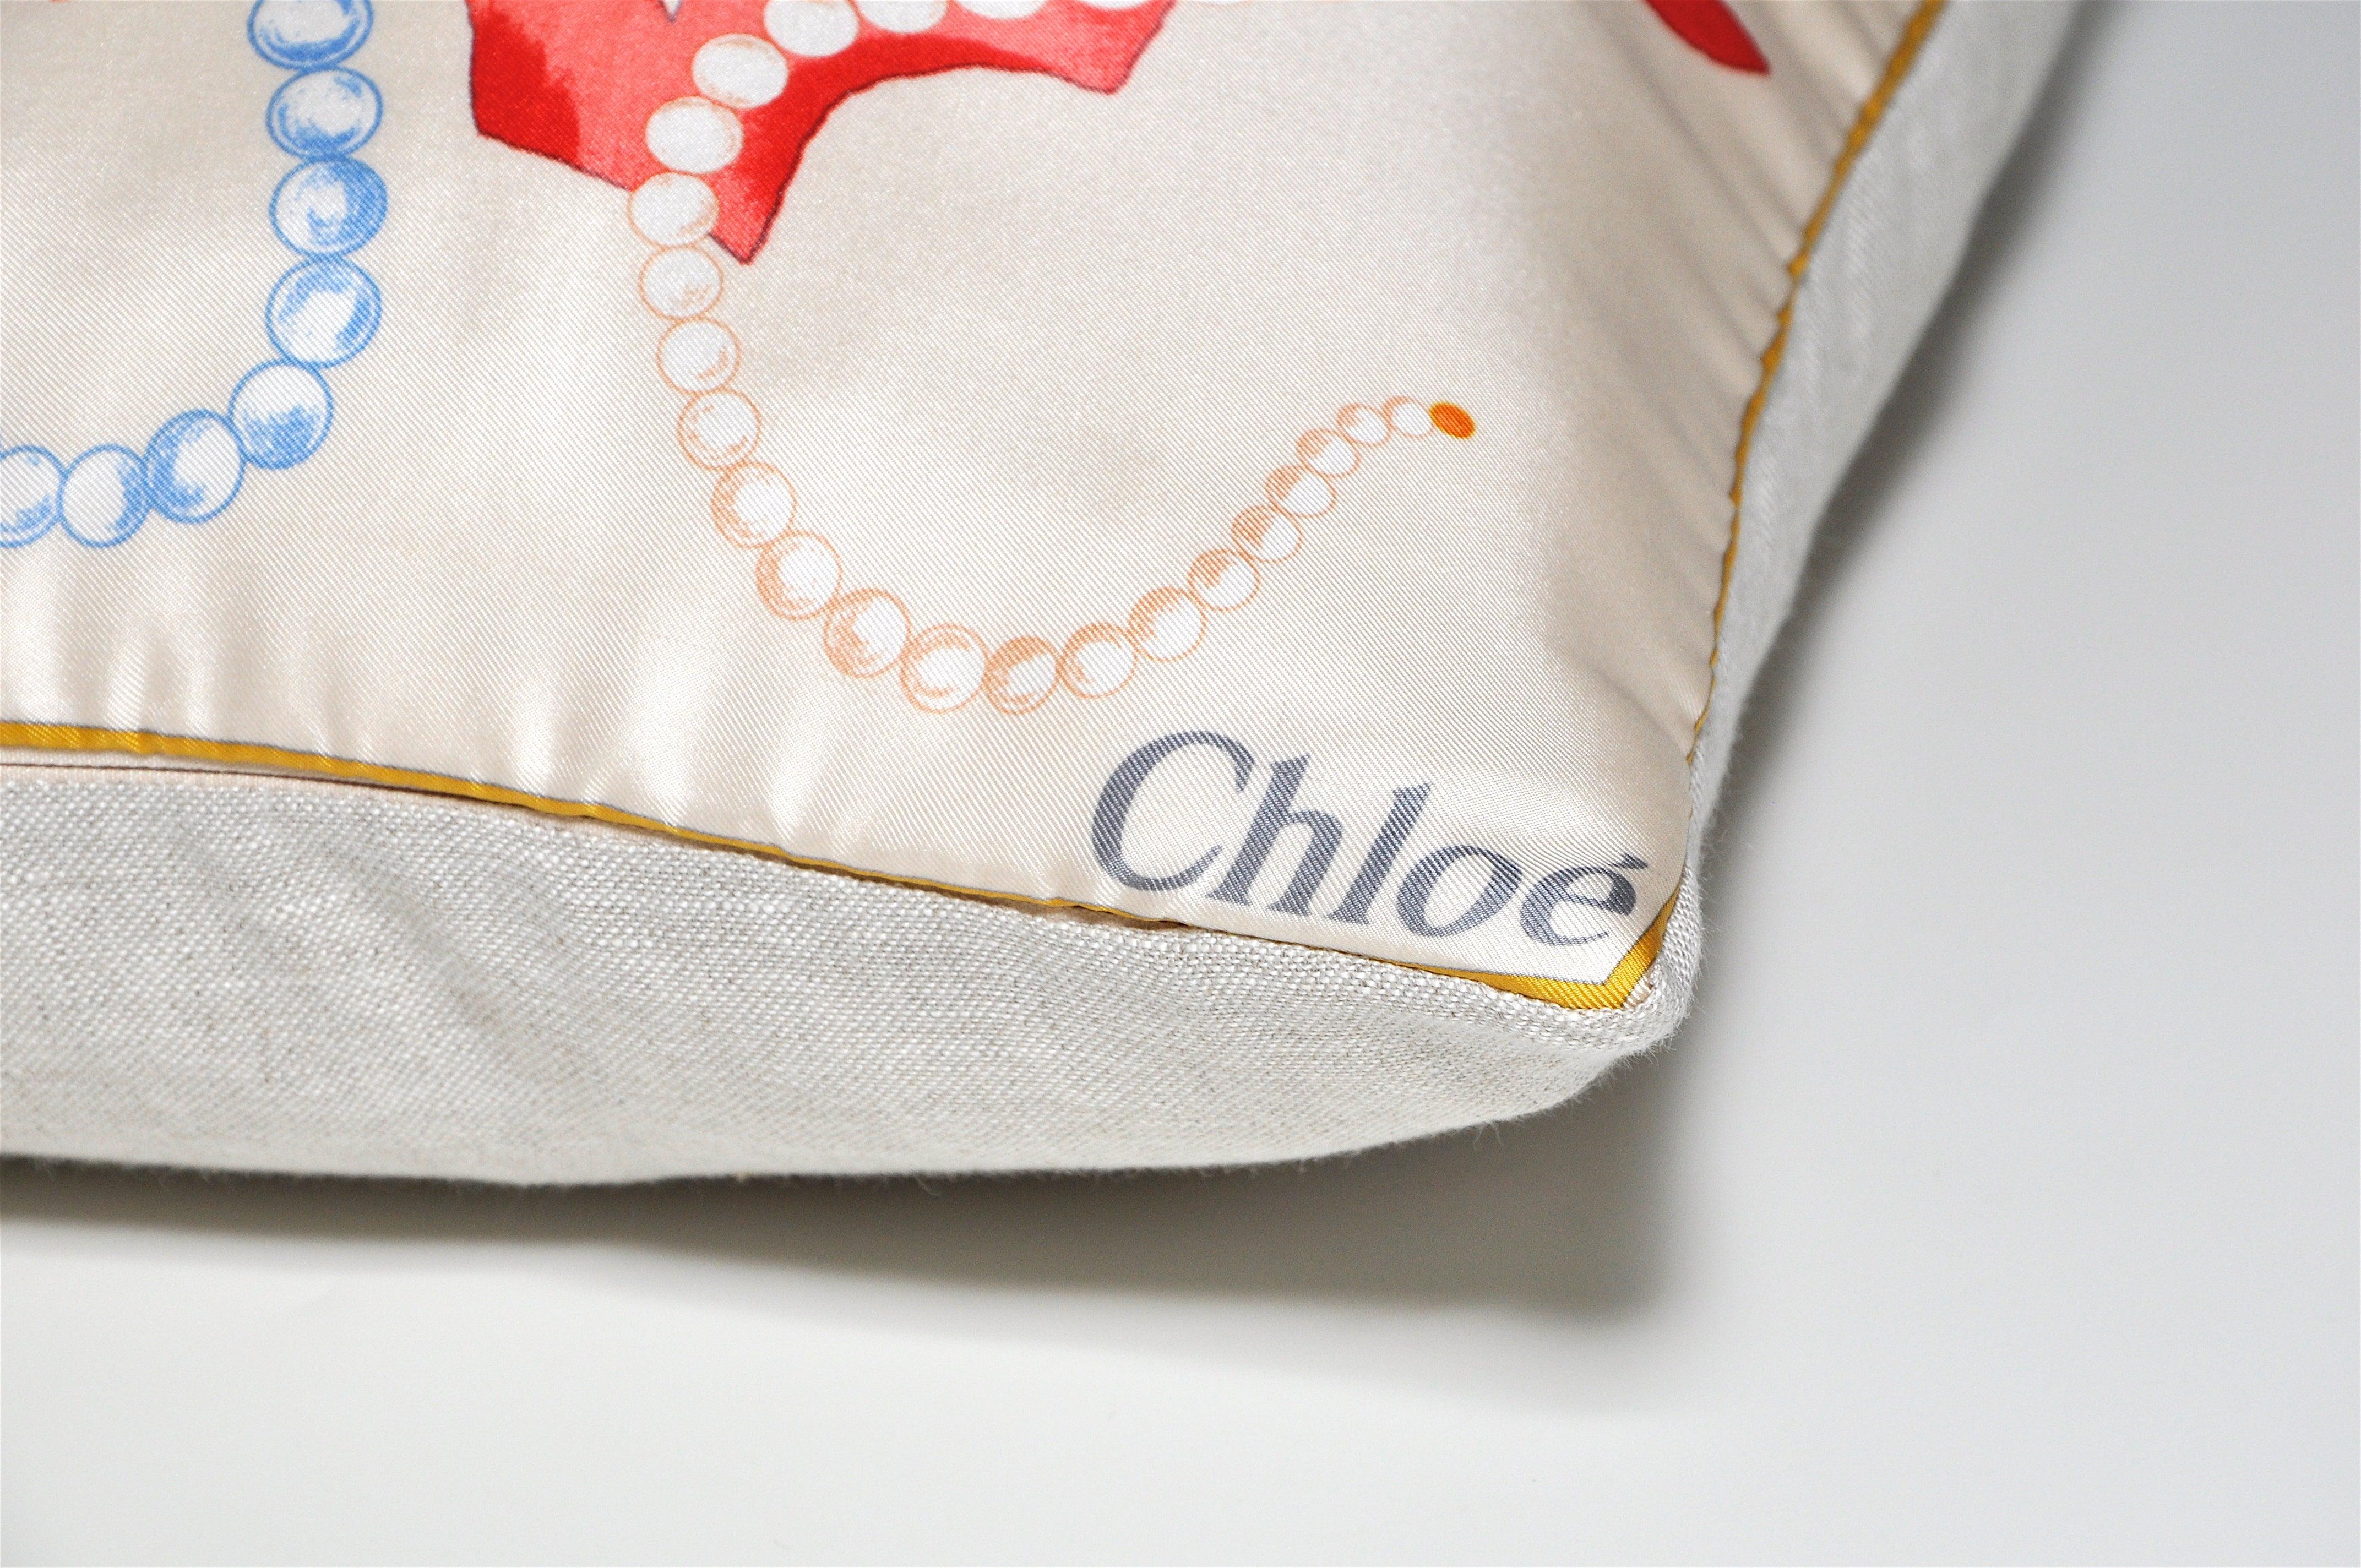 Title:
Vintage Chloe Nautical Pearl Coral Silk Scarf with Irish Linen Cushion Pillow 

Description:
Custom made one-of-a-kind luxury cushion (pillow) created from an exquisite vintage silk Chloe fashion scarf in a beautiful, magical, underwater